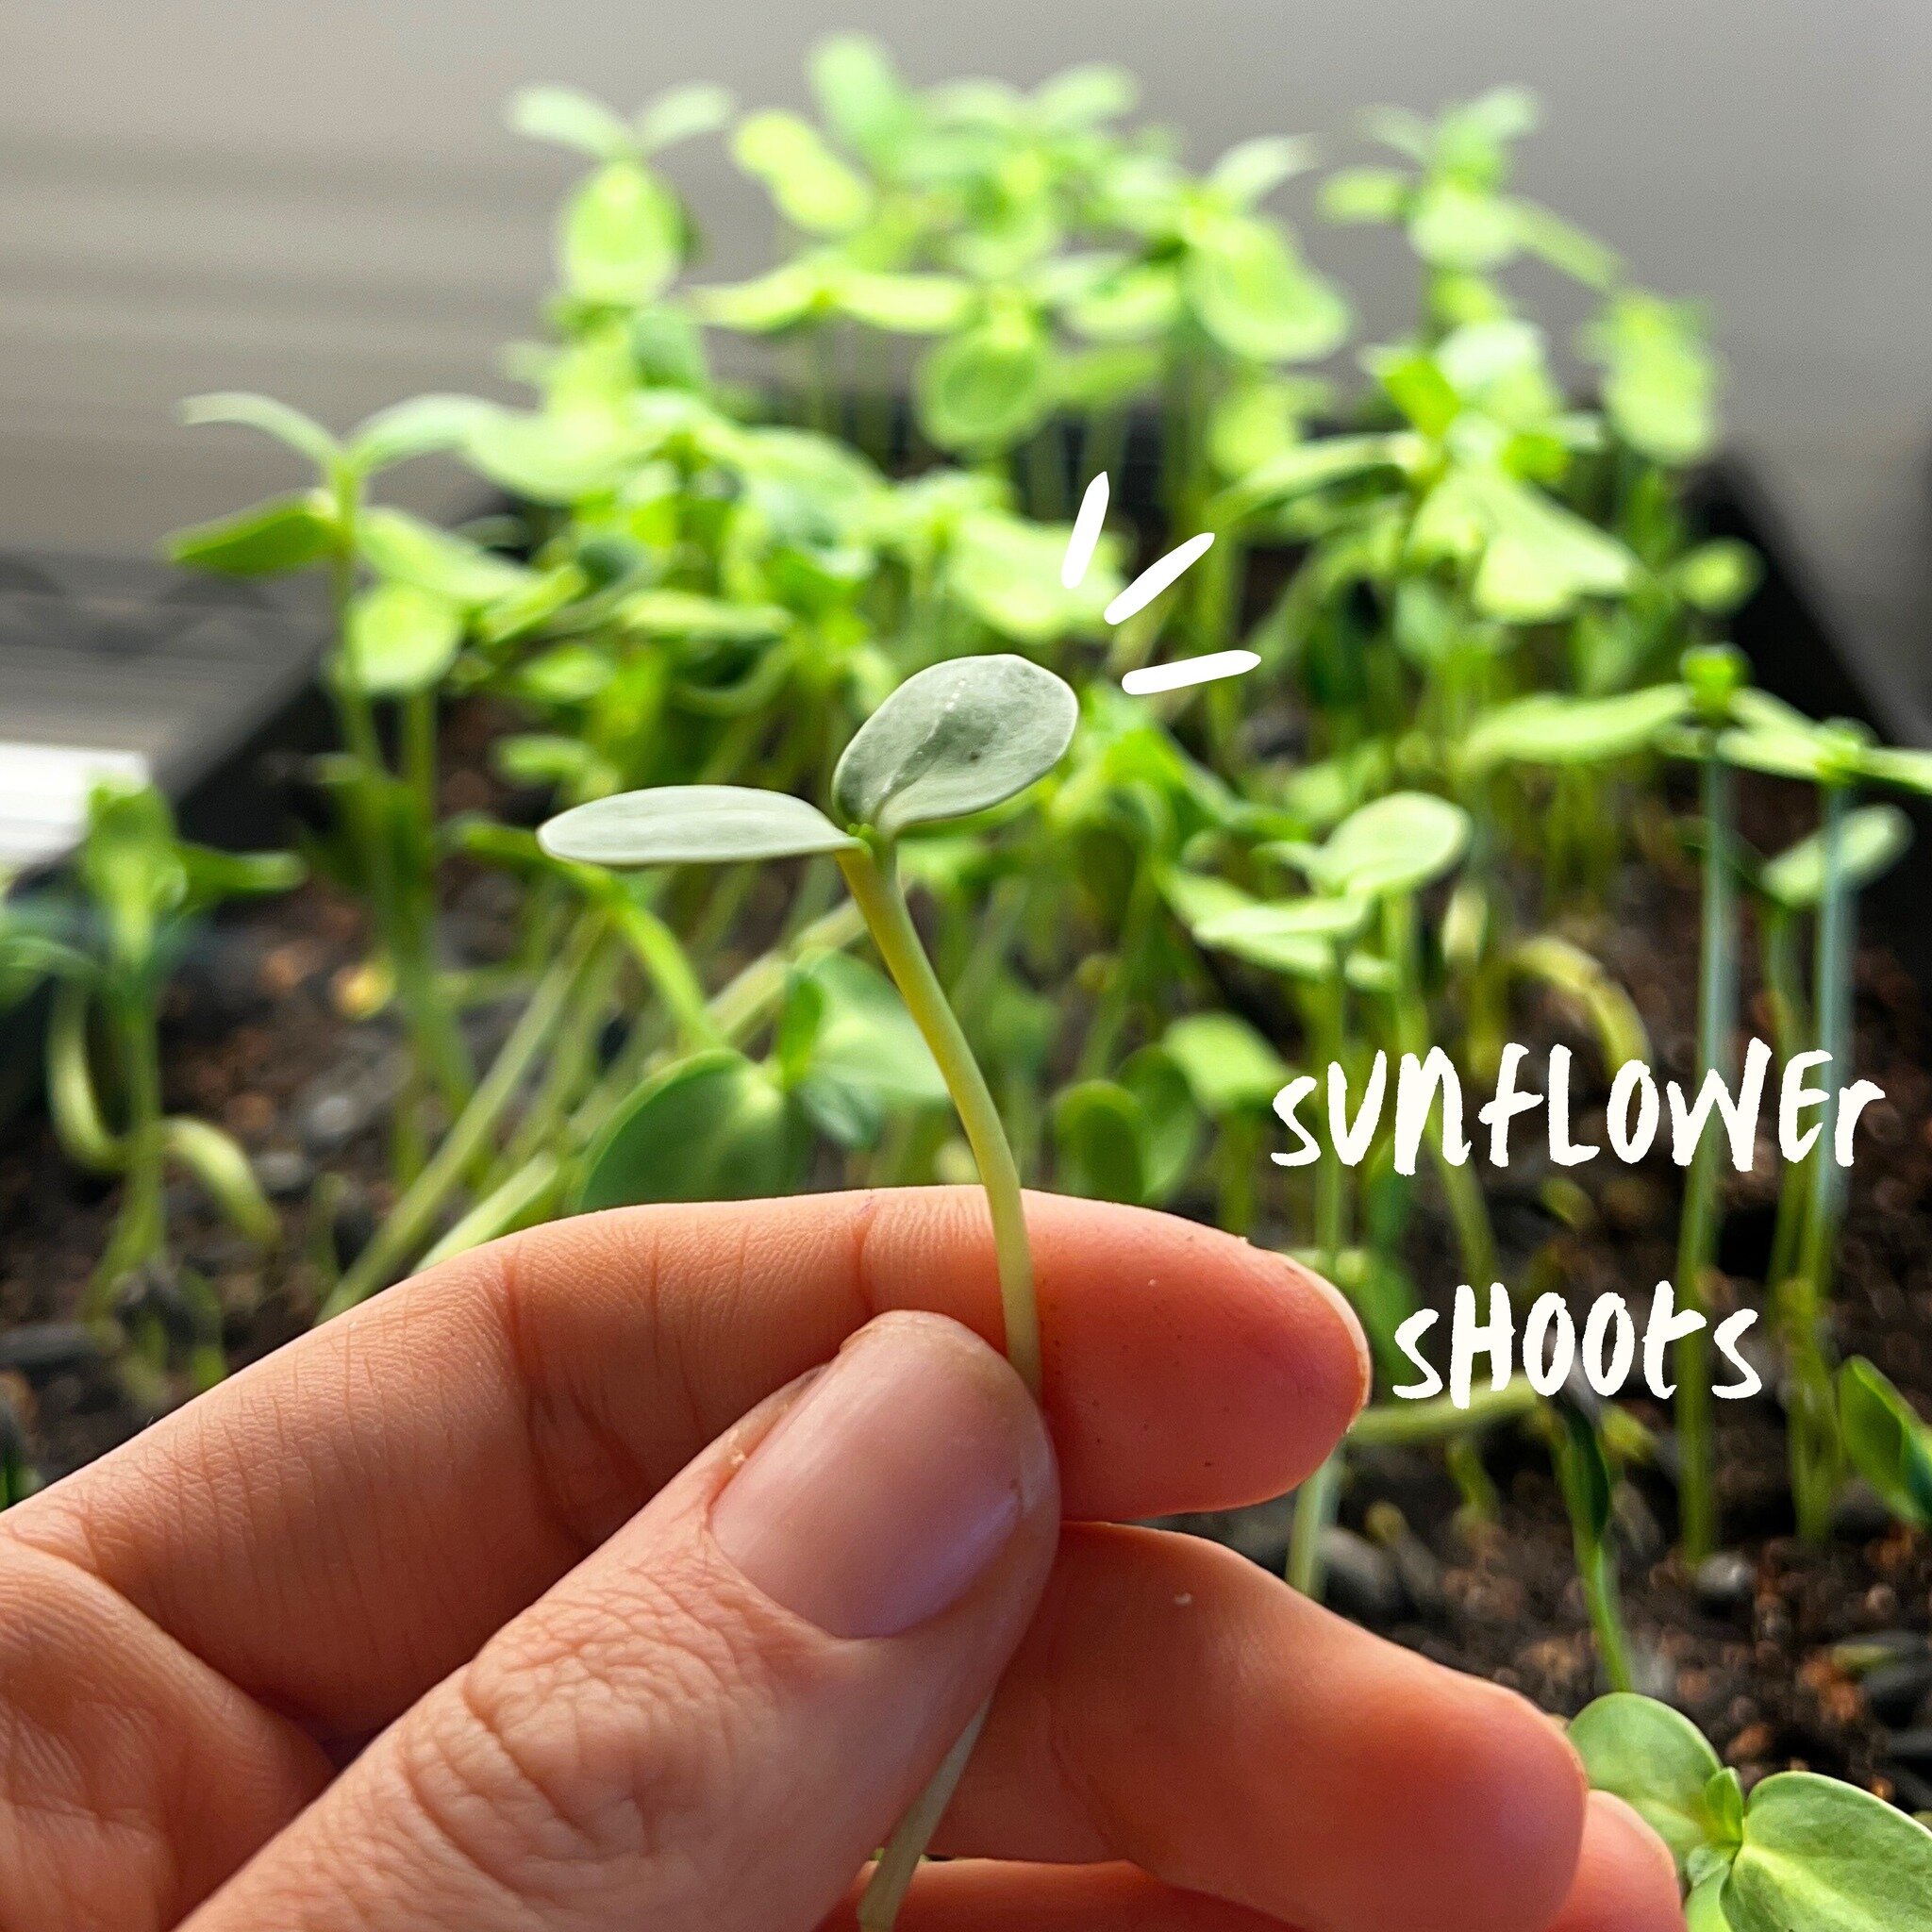 Another office favorite! 🌻 Sunflower shoots have a lovely nutty taste and crunchy texture. They&rsquo;re packed with nutrients AND protein. So easy to snack on! What&rsquo;s your go-to microgreen? 🌱 

#thepatchlondon #Idnontario #Idn #donations #fo